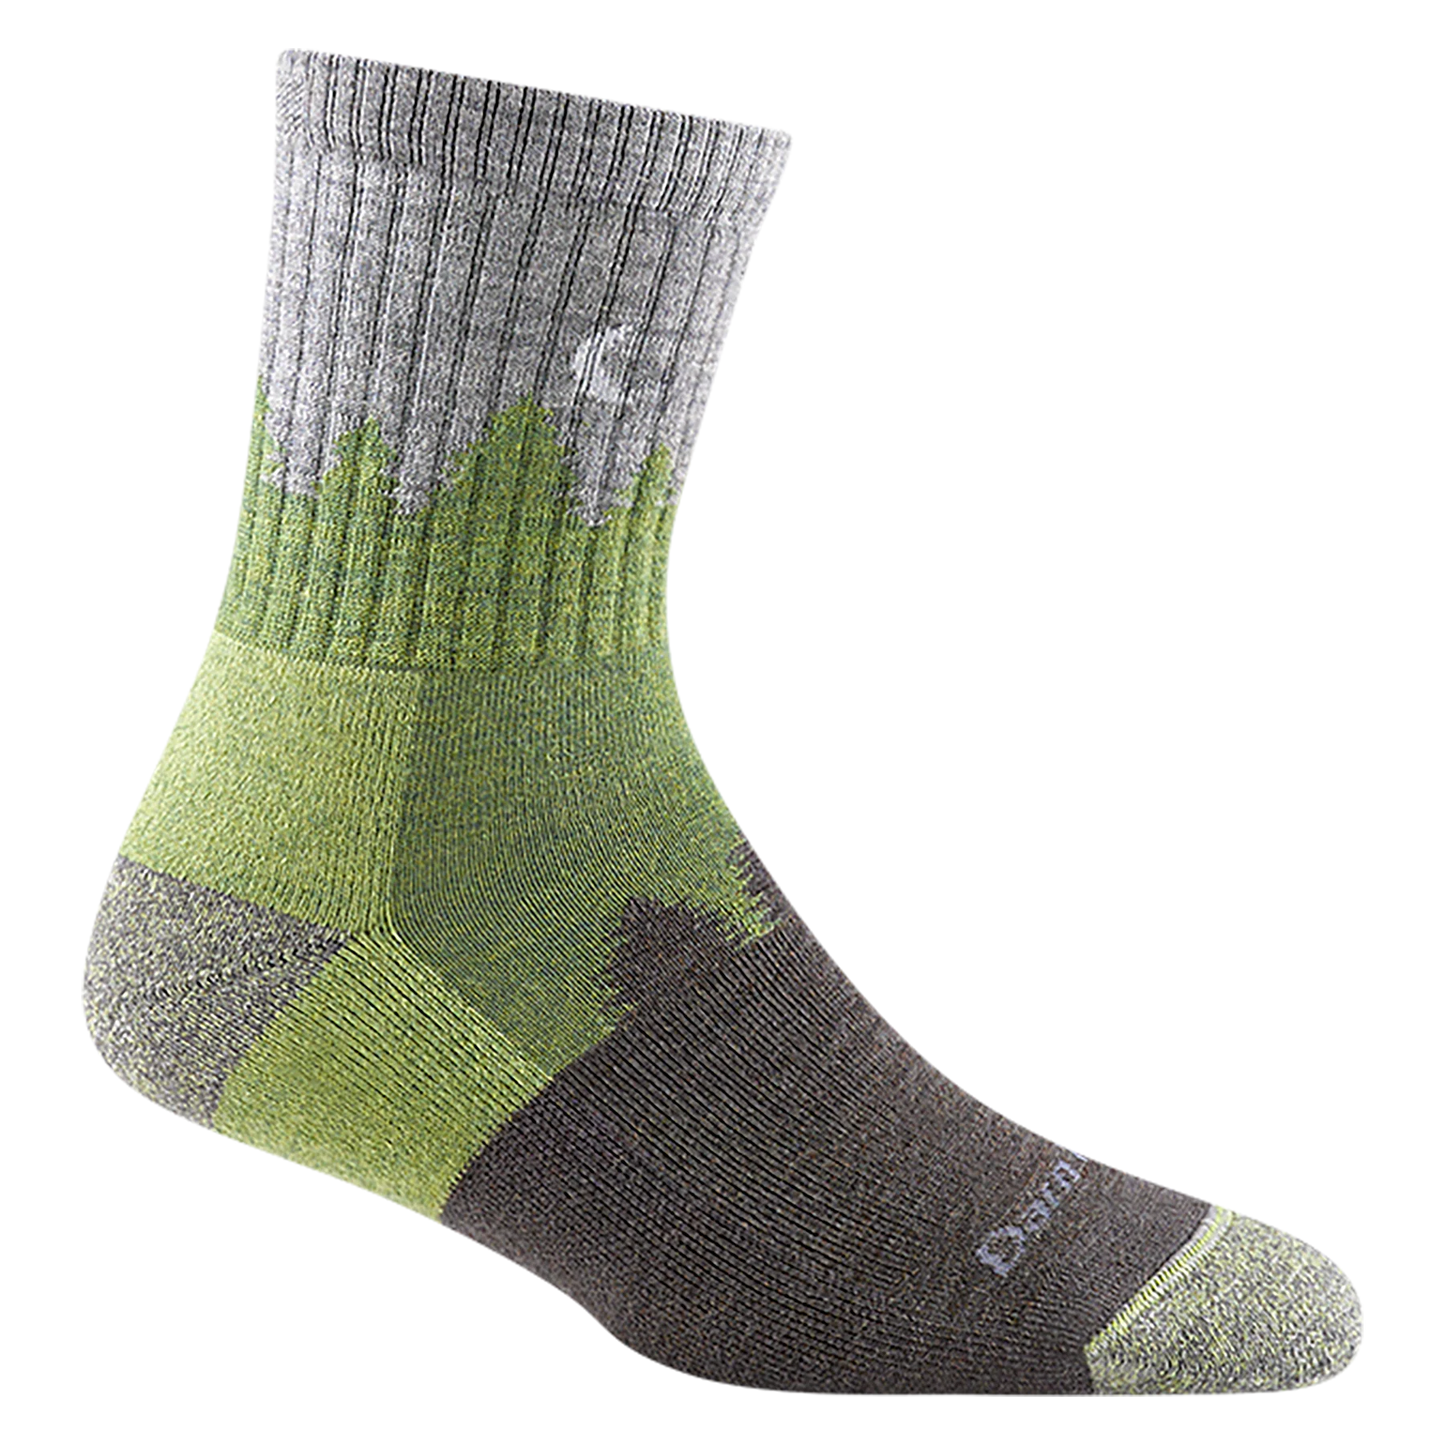 Darn Tough Womans Treeline Micro Crew Midweight Hiking Sock, Lavender with shades of green & gray, side view